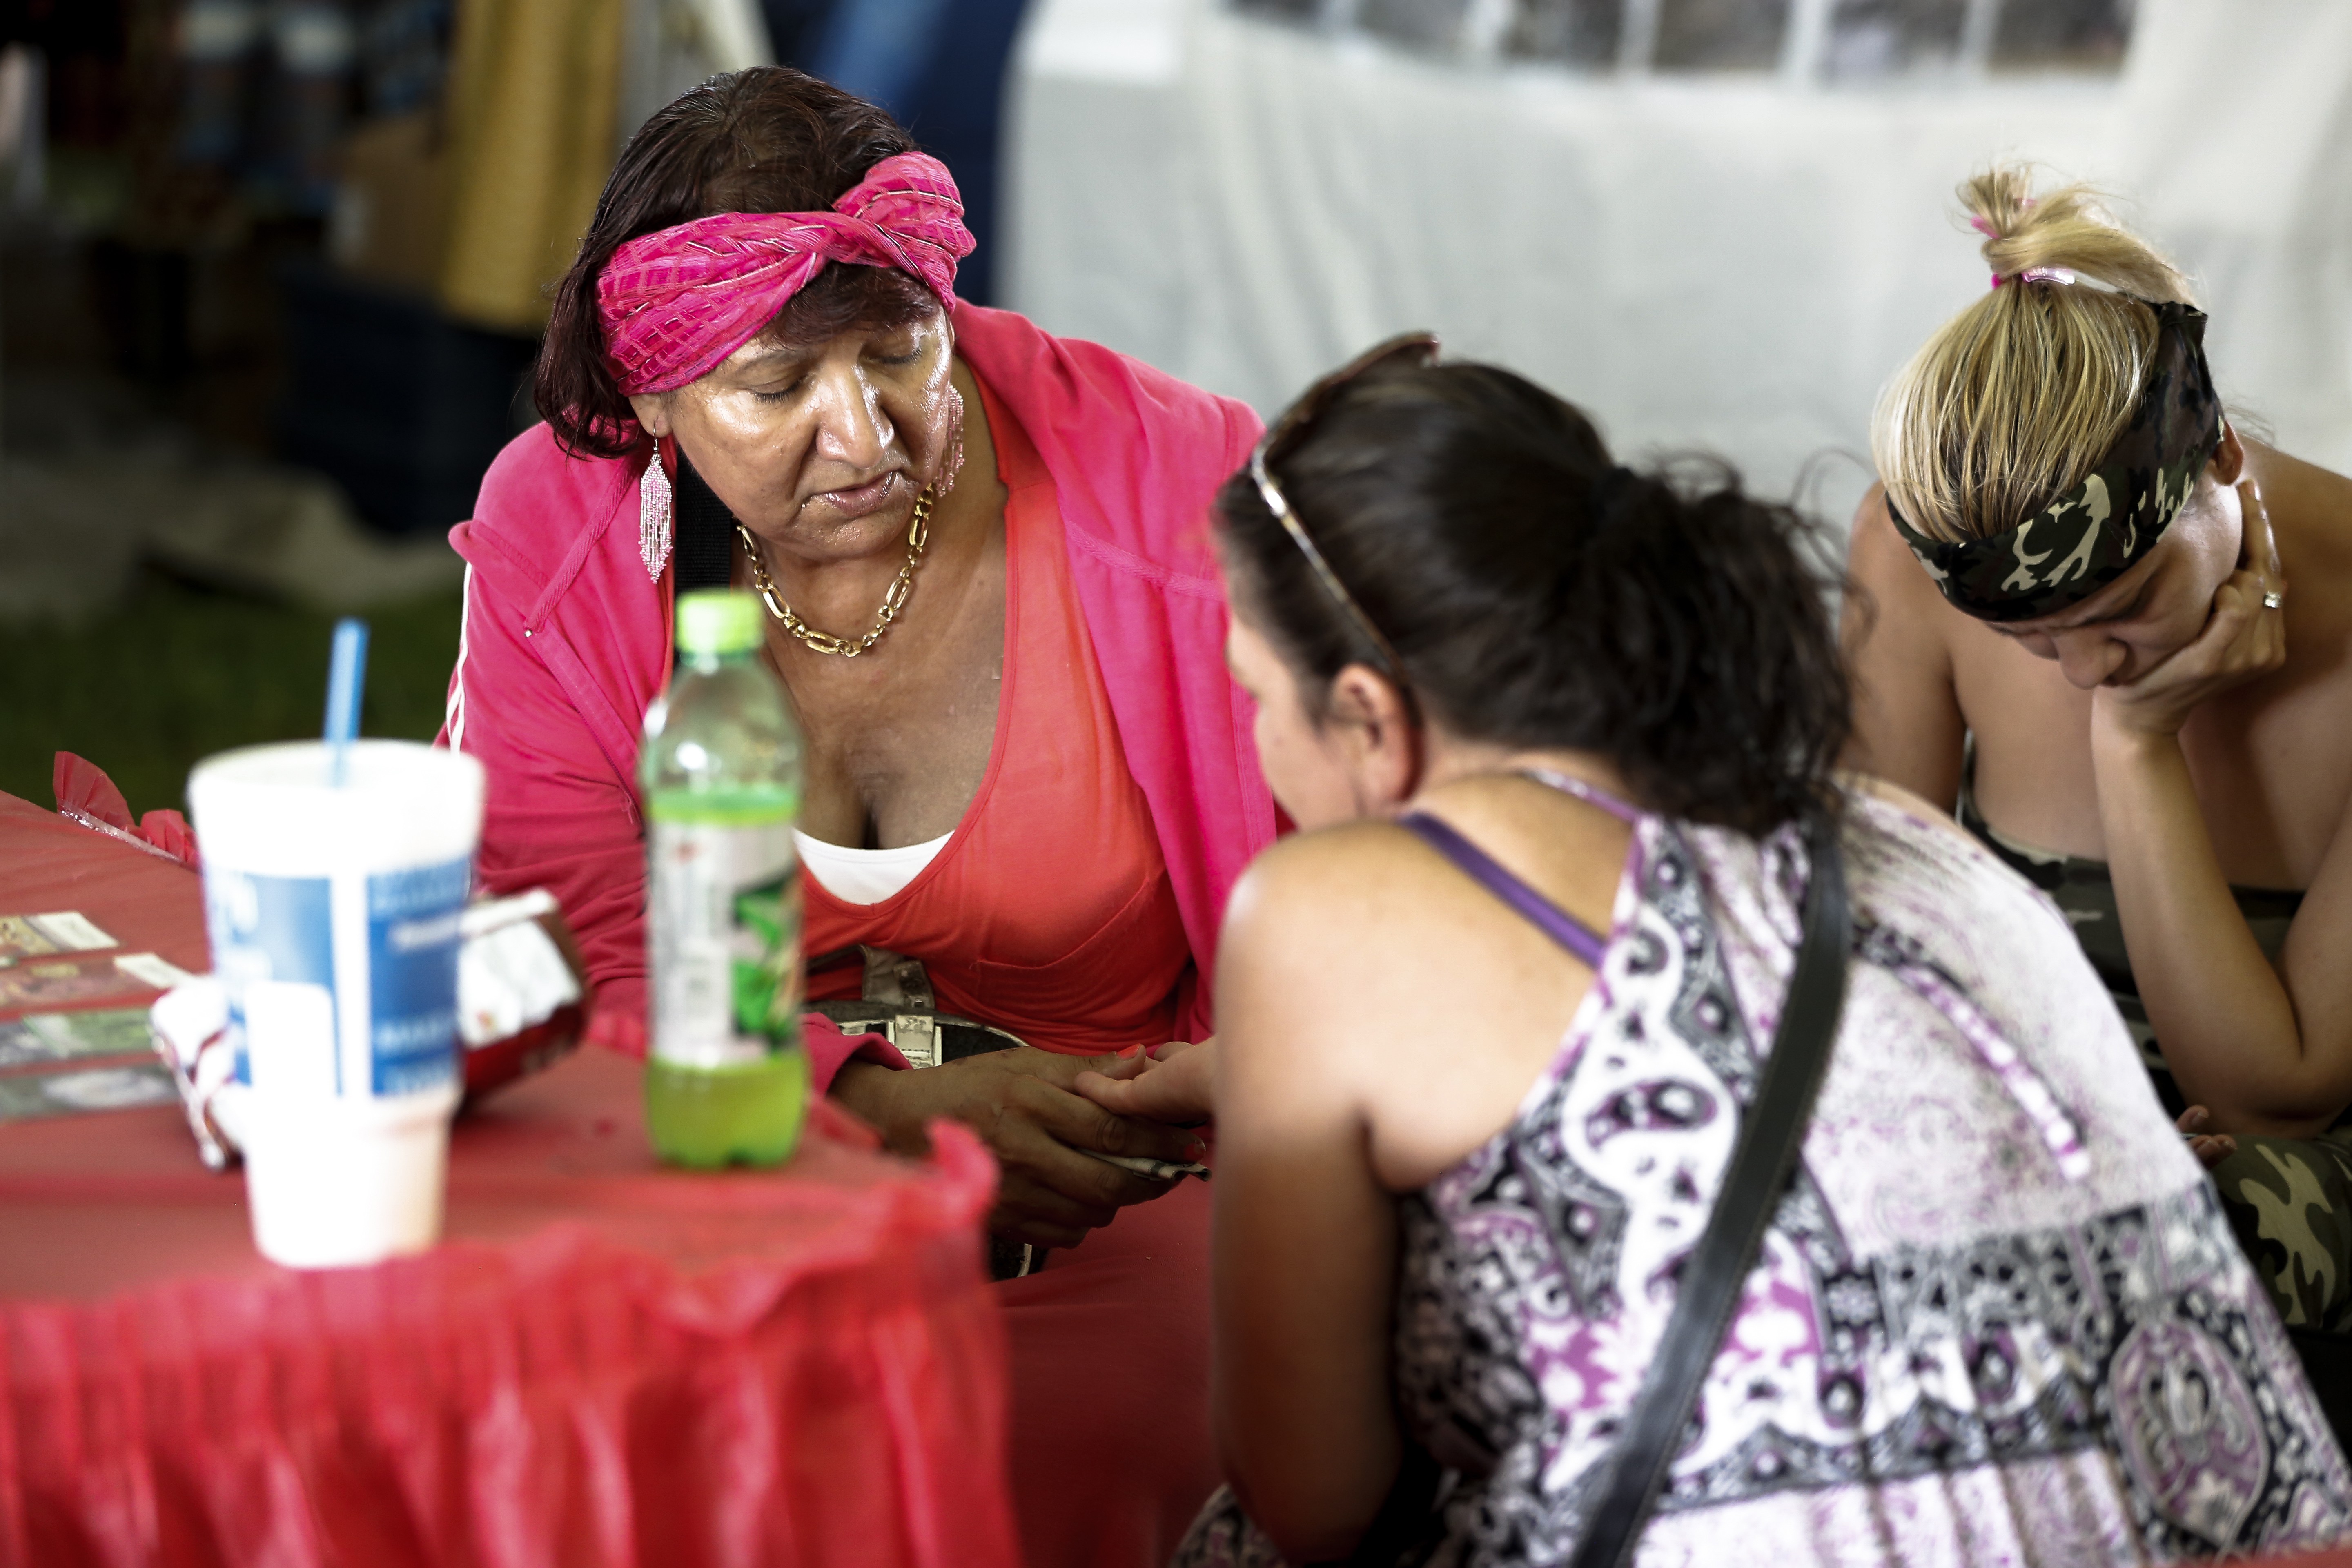 A festival goer gets her palm read.